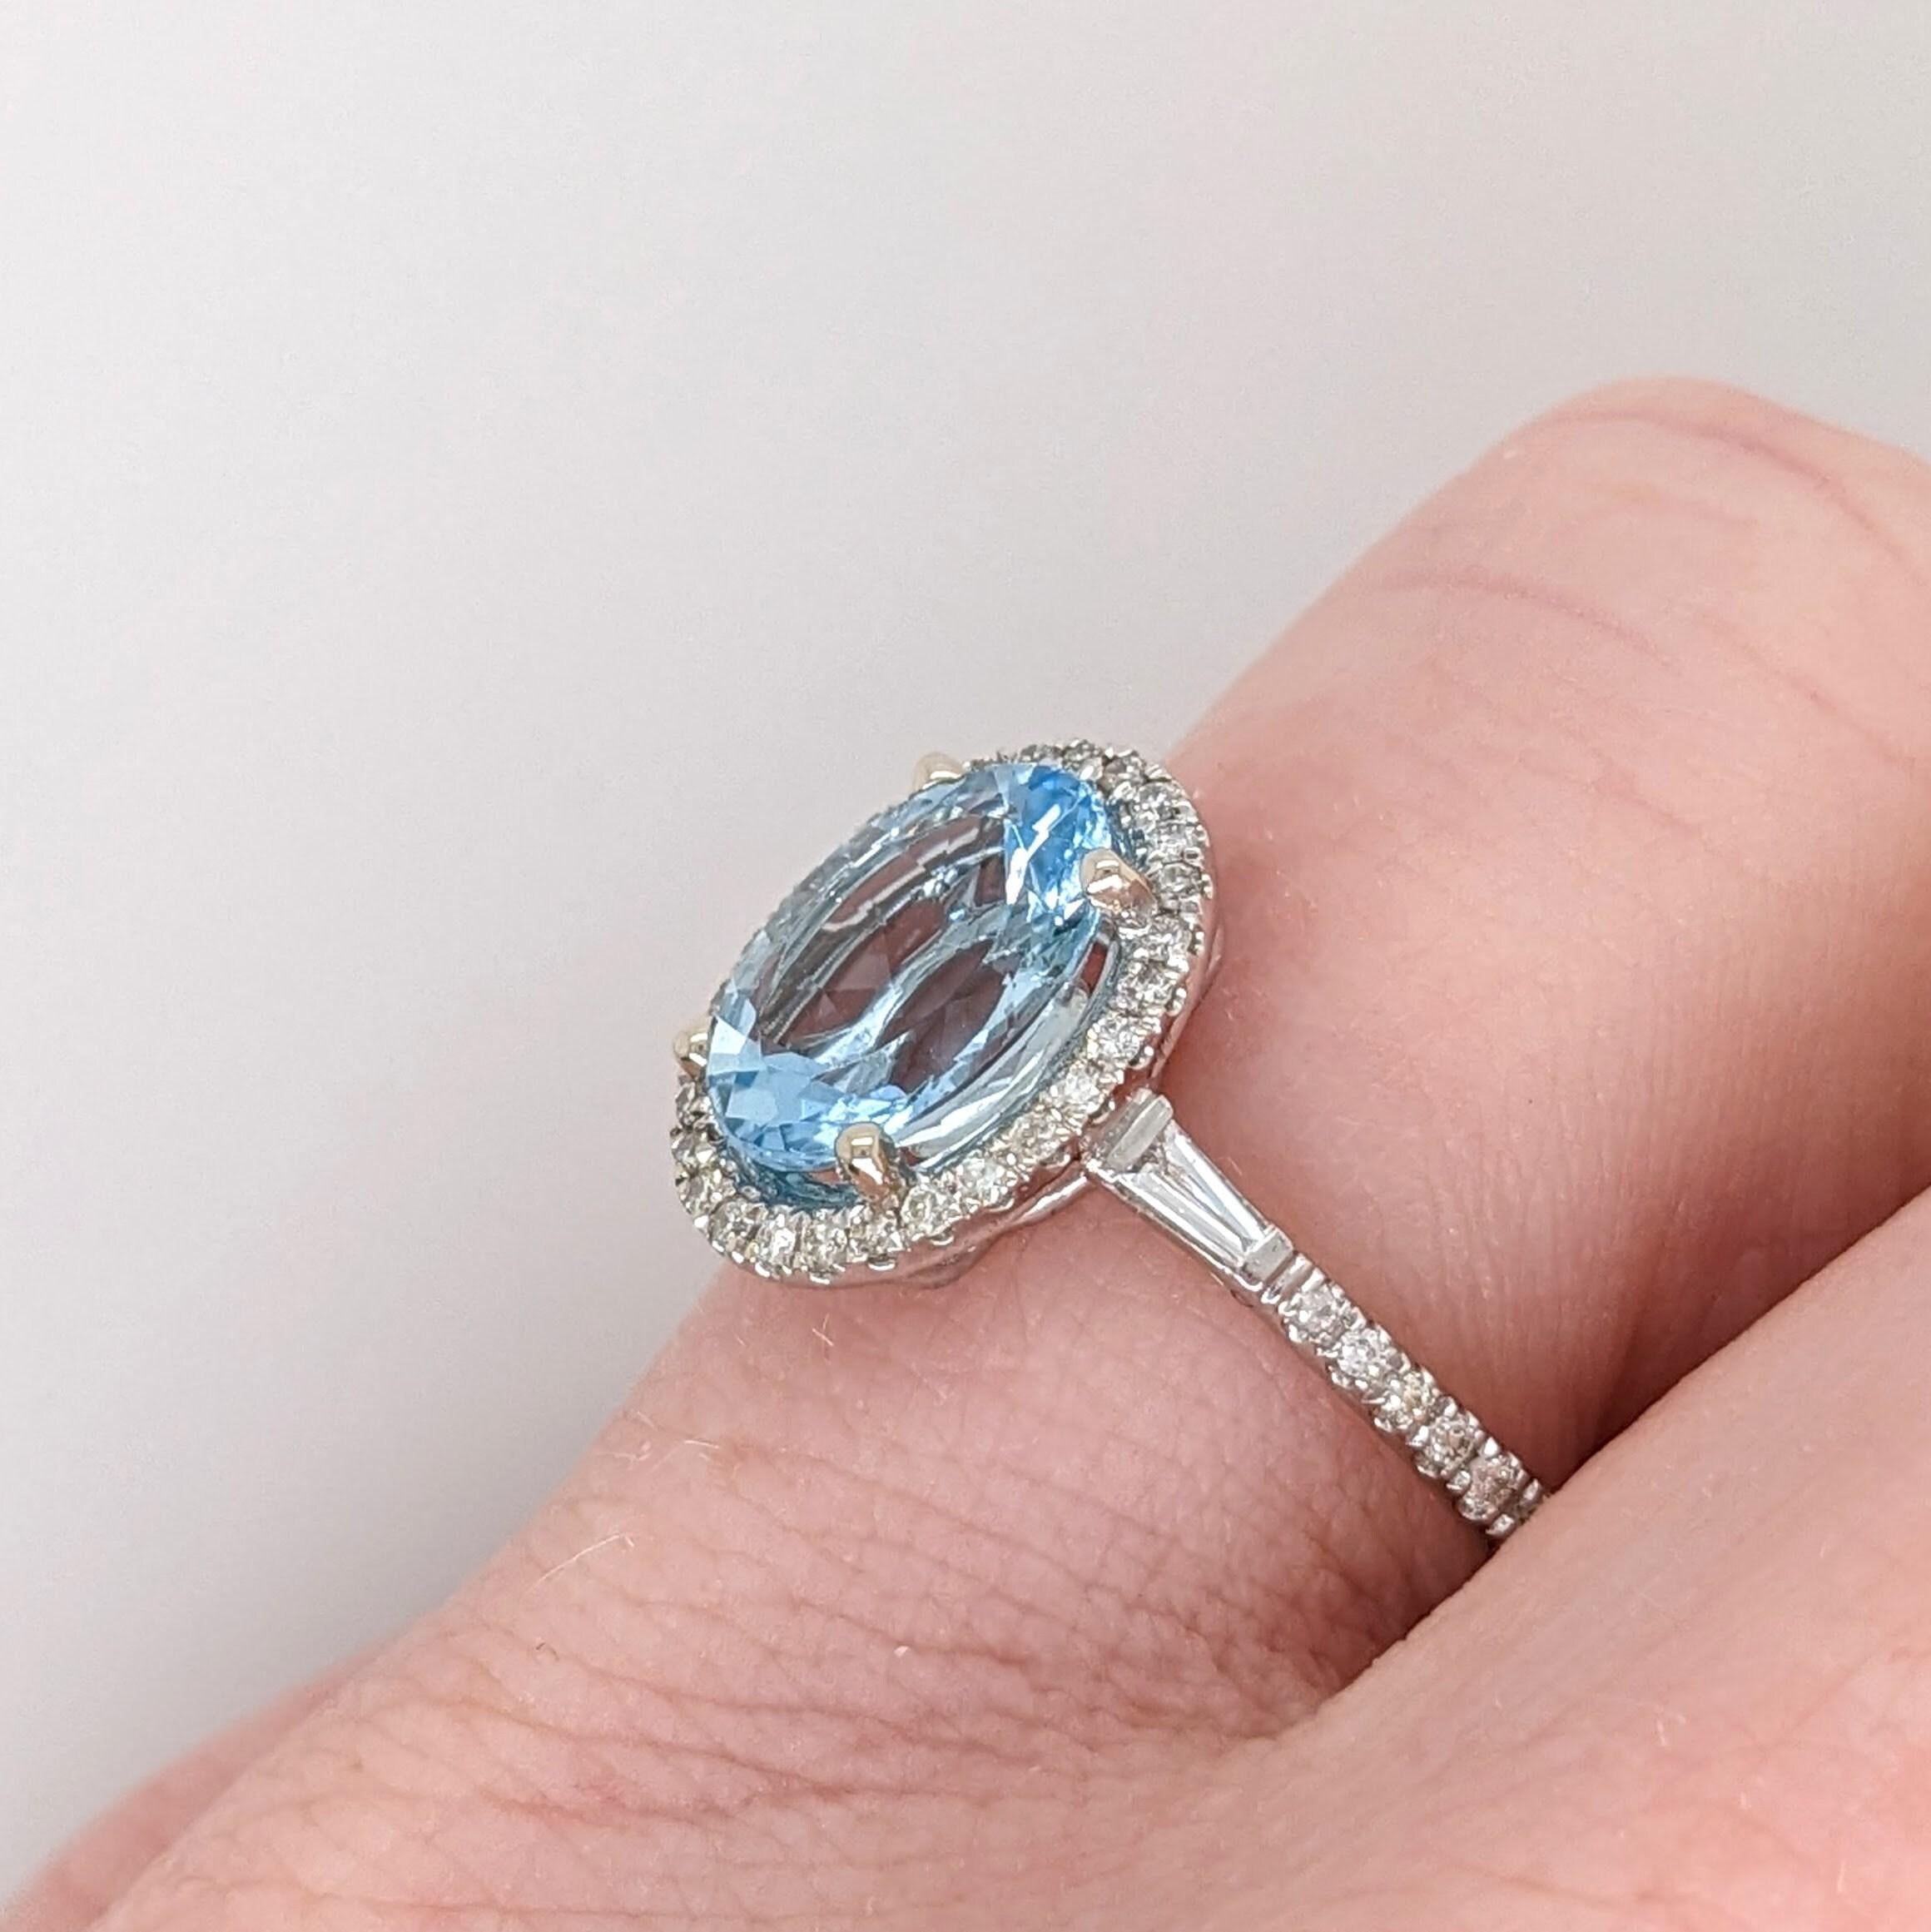 Beautiful Aquamarine Ring in Solid 14K White Gold with a Halo of Natural Diamond 2